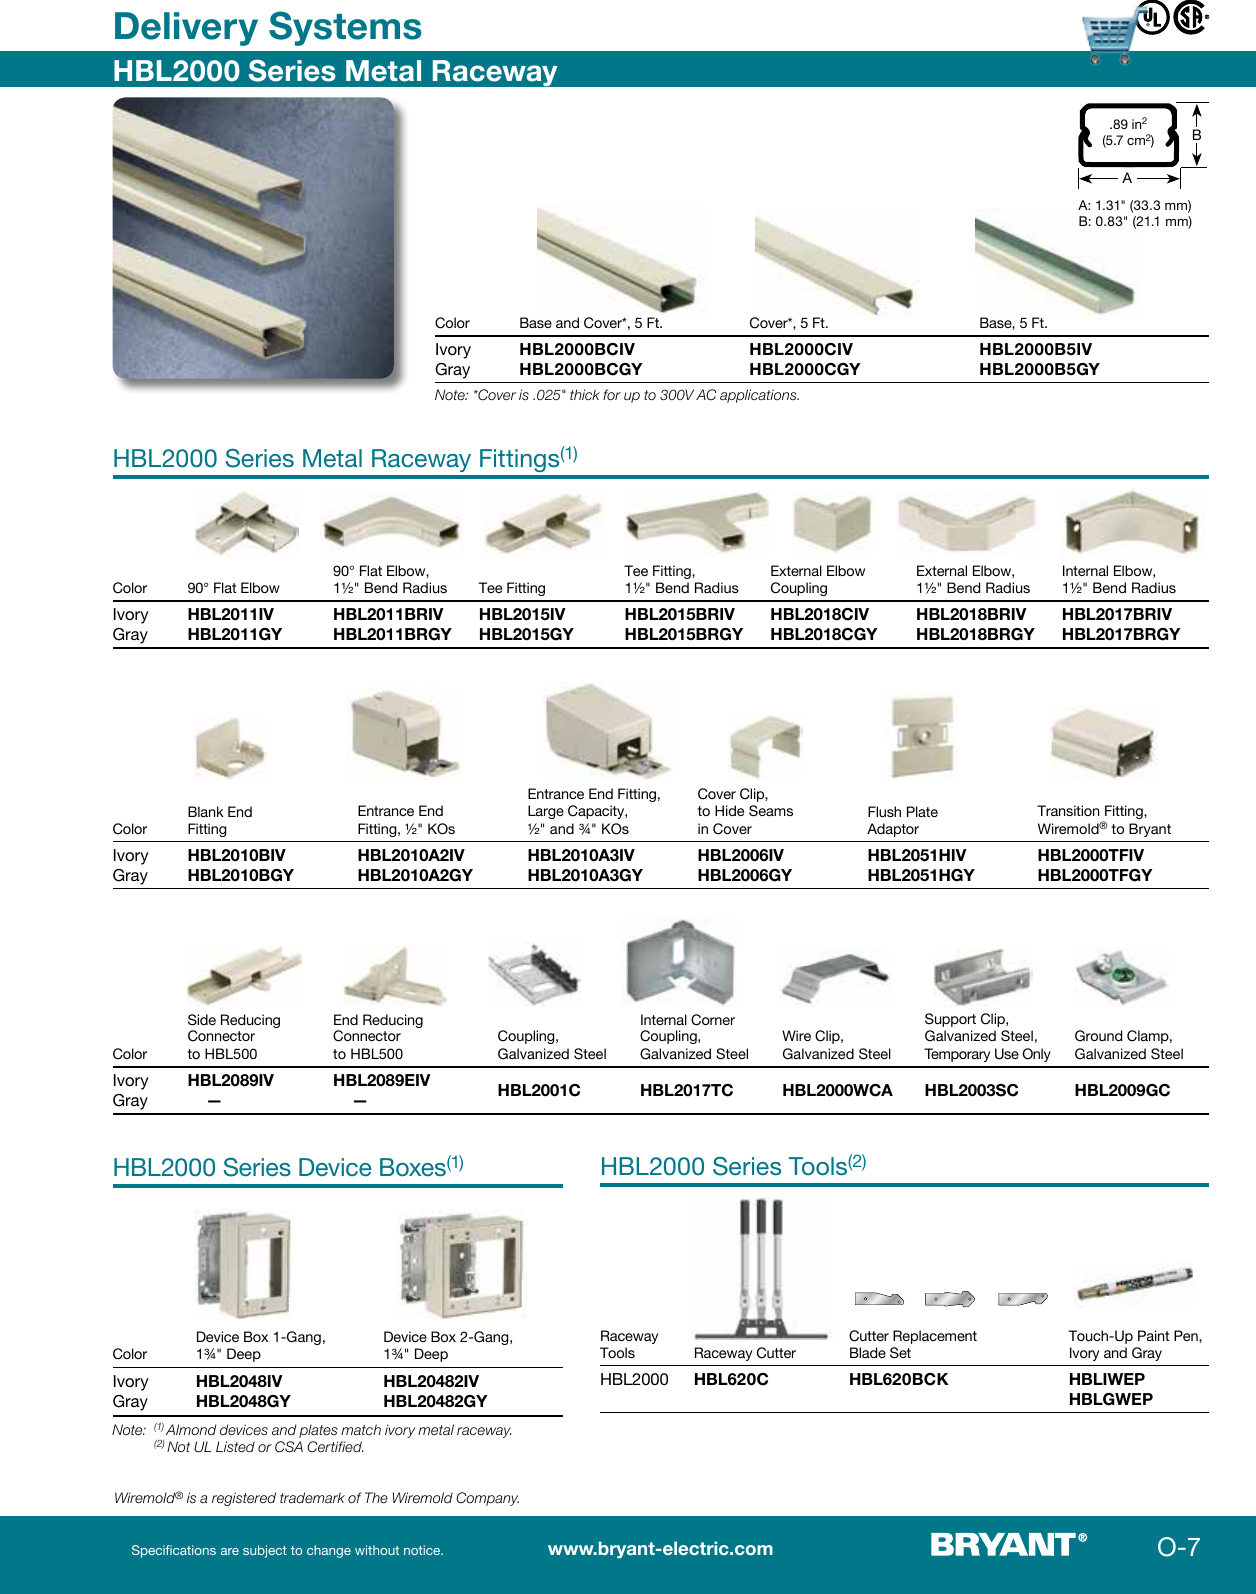 Page 7 of 12 - 1000293193-Catalog